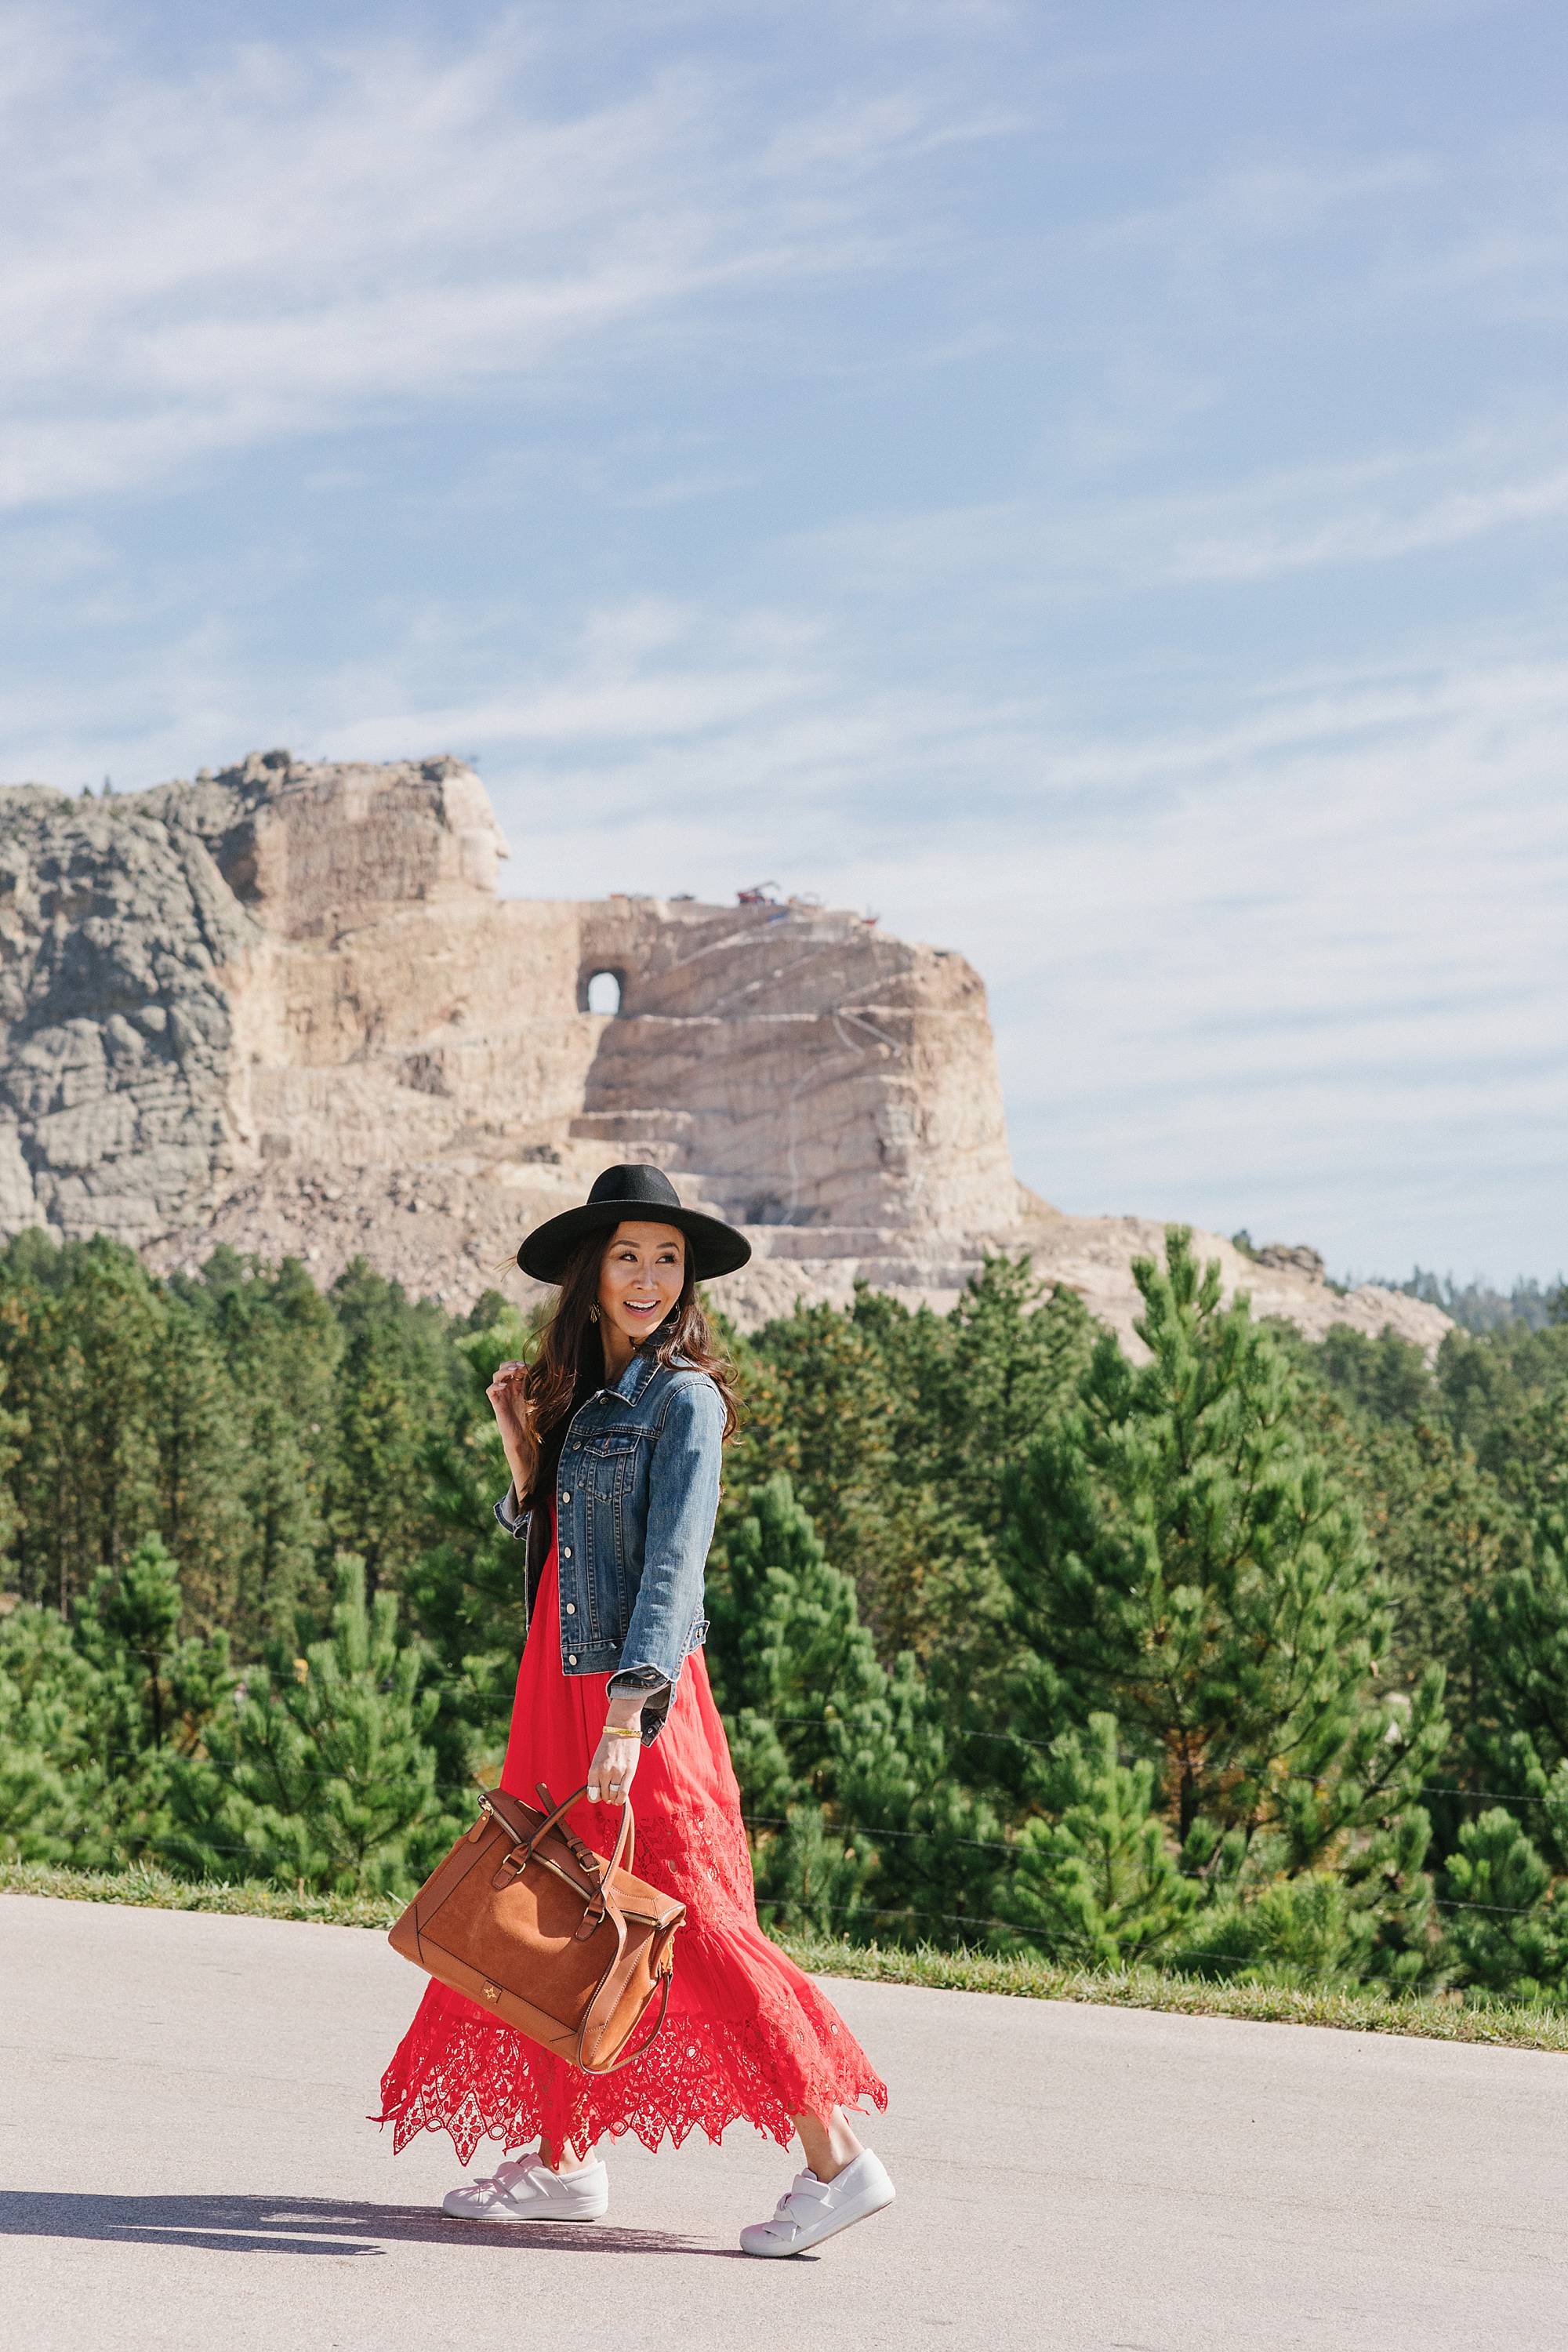 Crazy Horse Memorial in South Dakota - Diana Elizabeth Phoenix lifestyle blogger wearing red free people dress and wool hat and denim jacket posing and wearing white sneakers